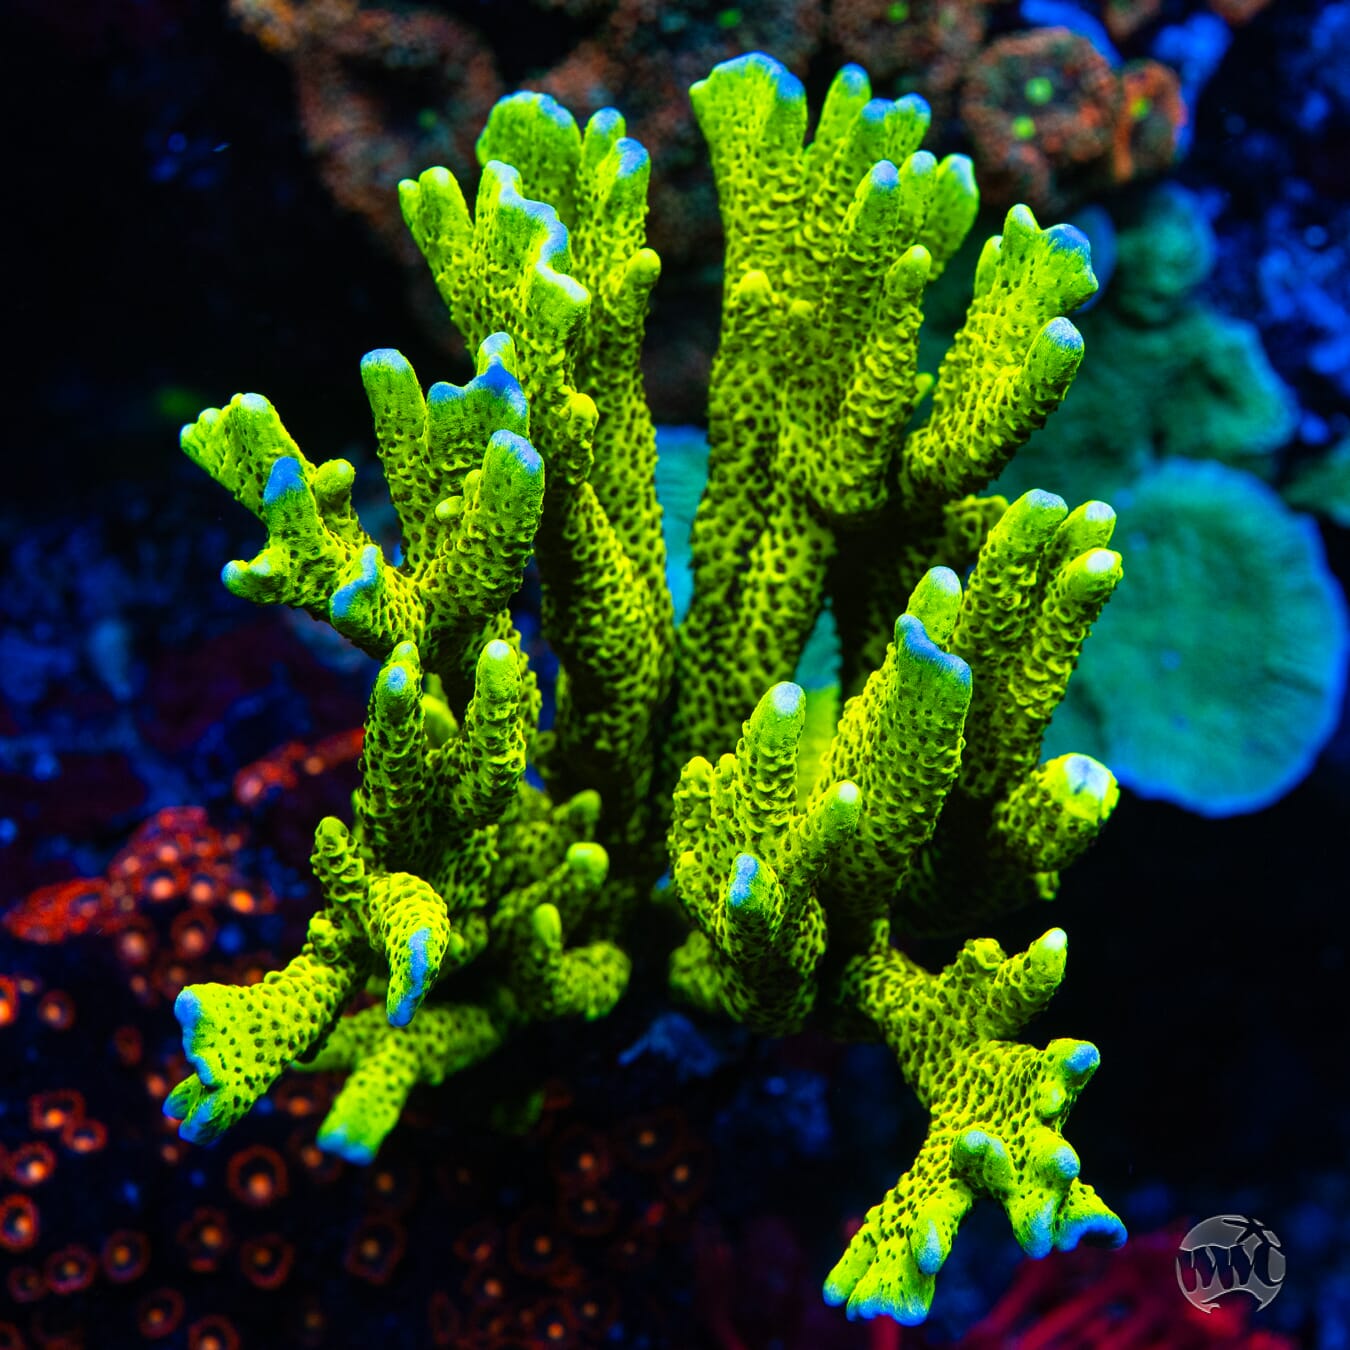 WWC Slimeball Spongodes Montipora - Mother Colony